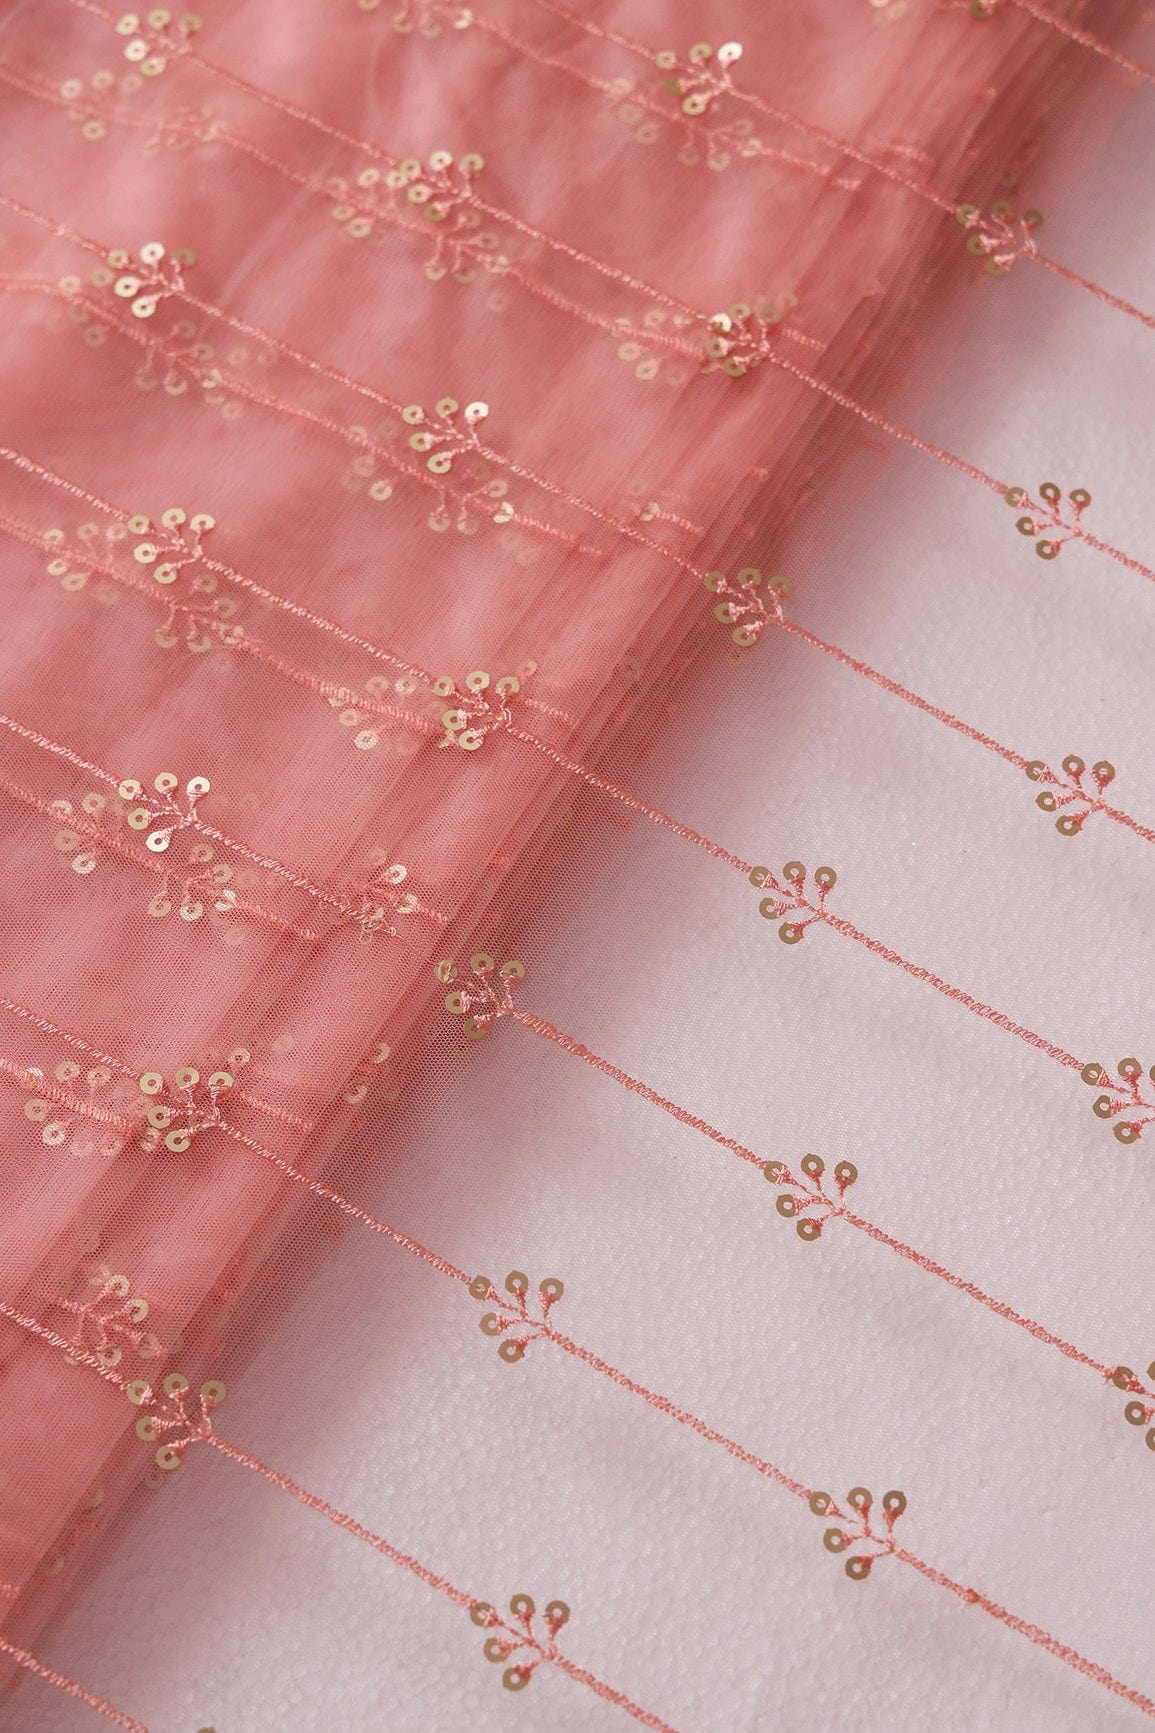 doeraa Embroidery Fabrics Gold Sequins With Pink Thread Beautiful Stripes Embroidery Work On Pink Soft Net Fabric